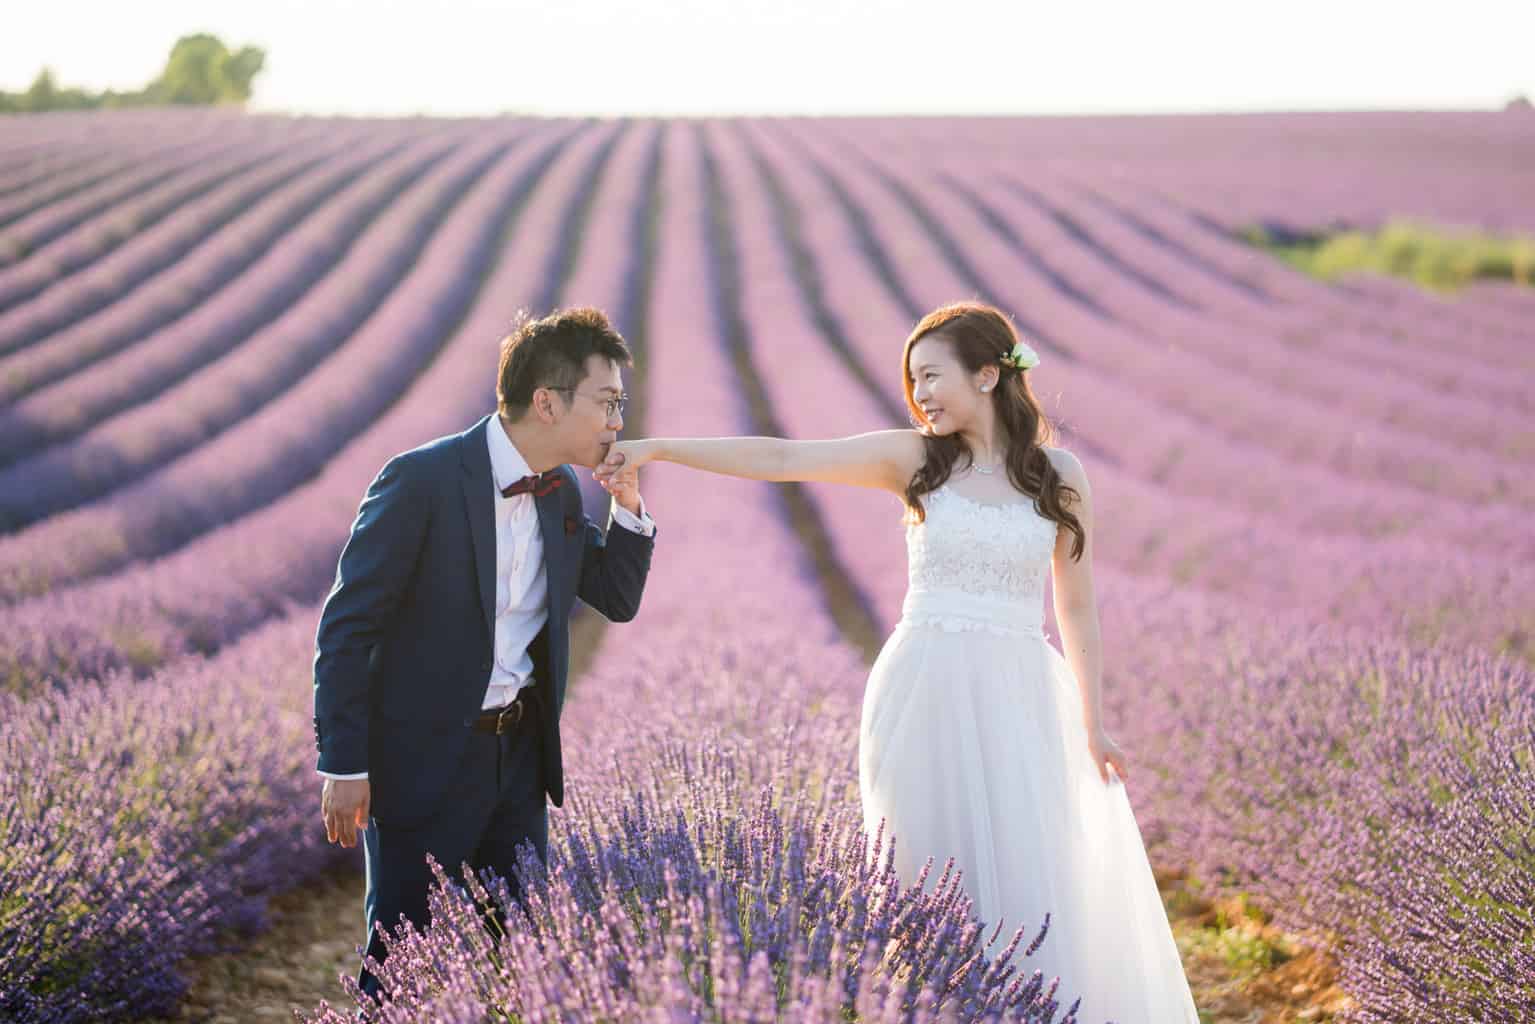 Intimate Wedding Ceremony In The Lavender Fields 51